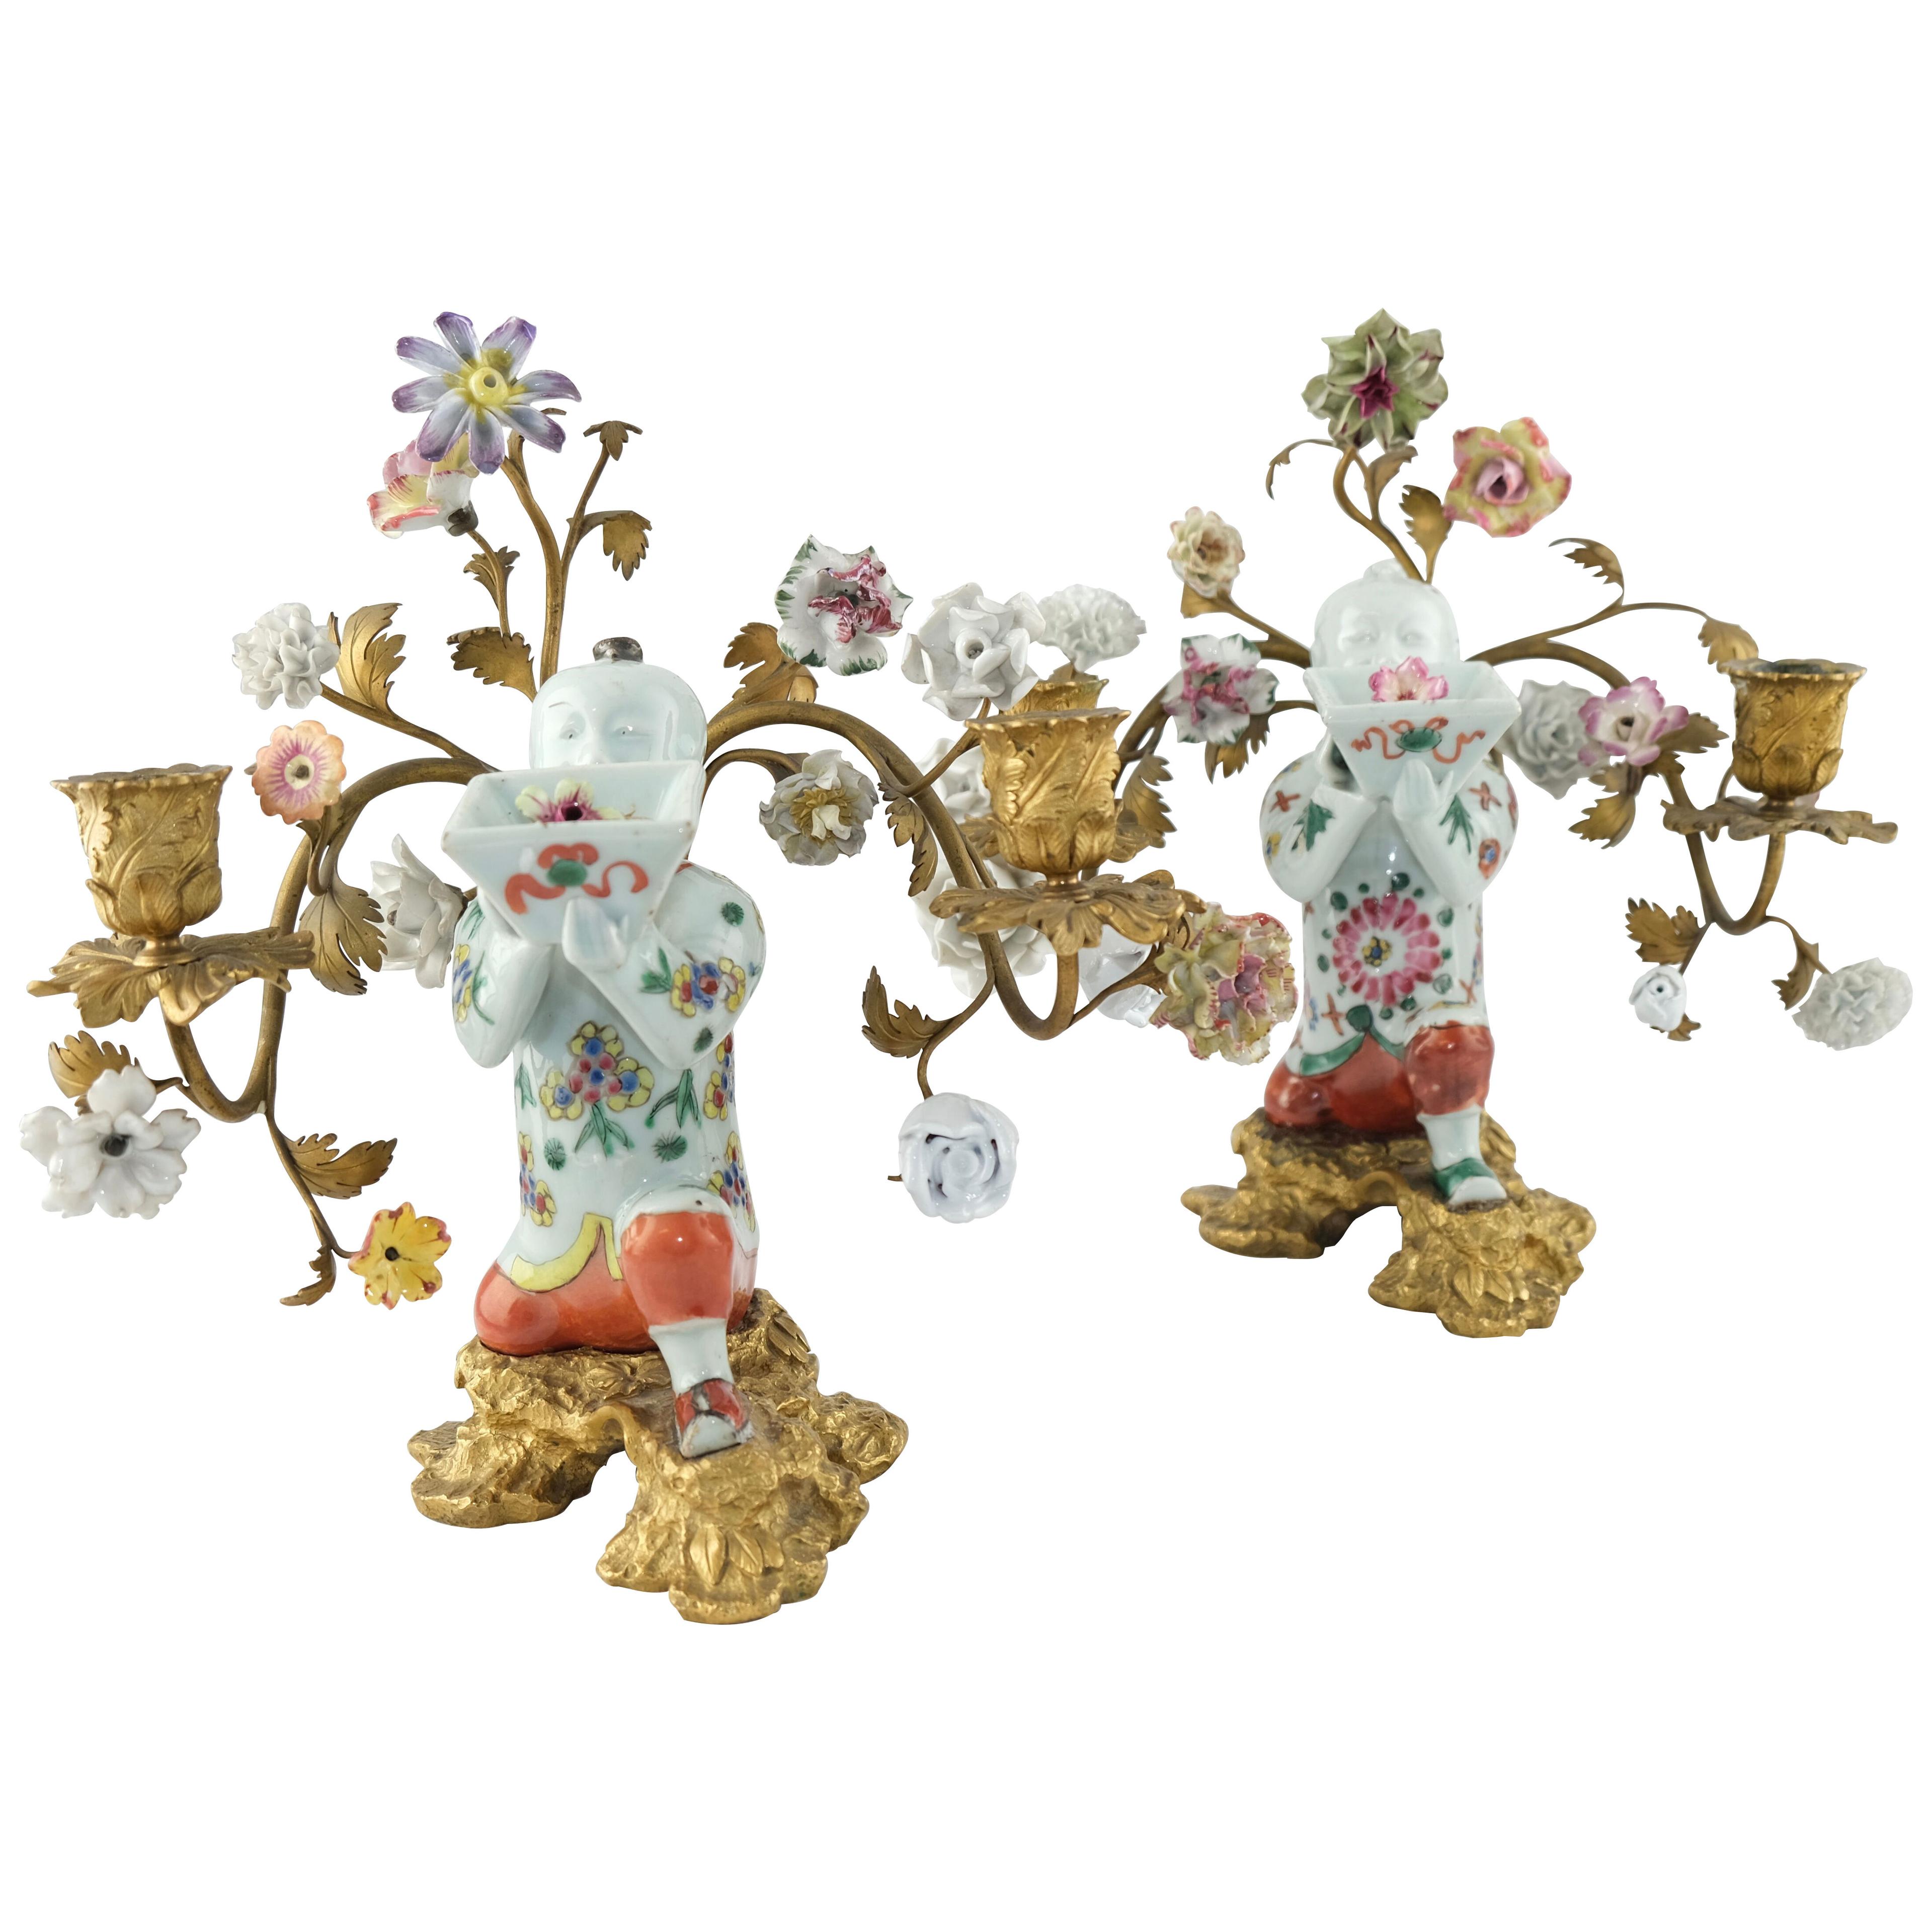 A pair of candelabra. Chinese 18th c porcelain mounted with 19th c bronzes.